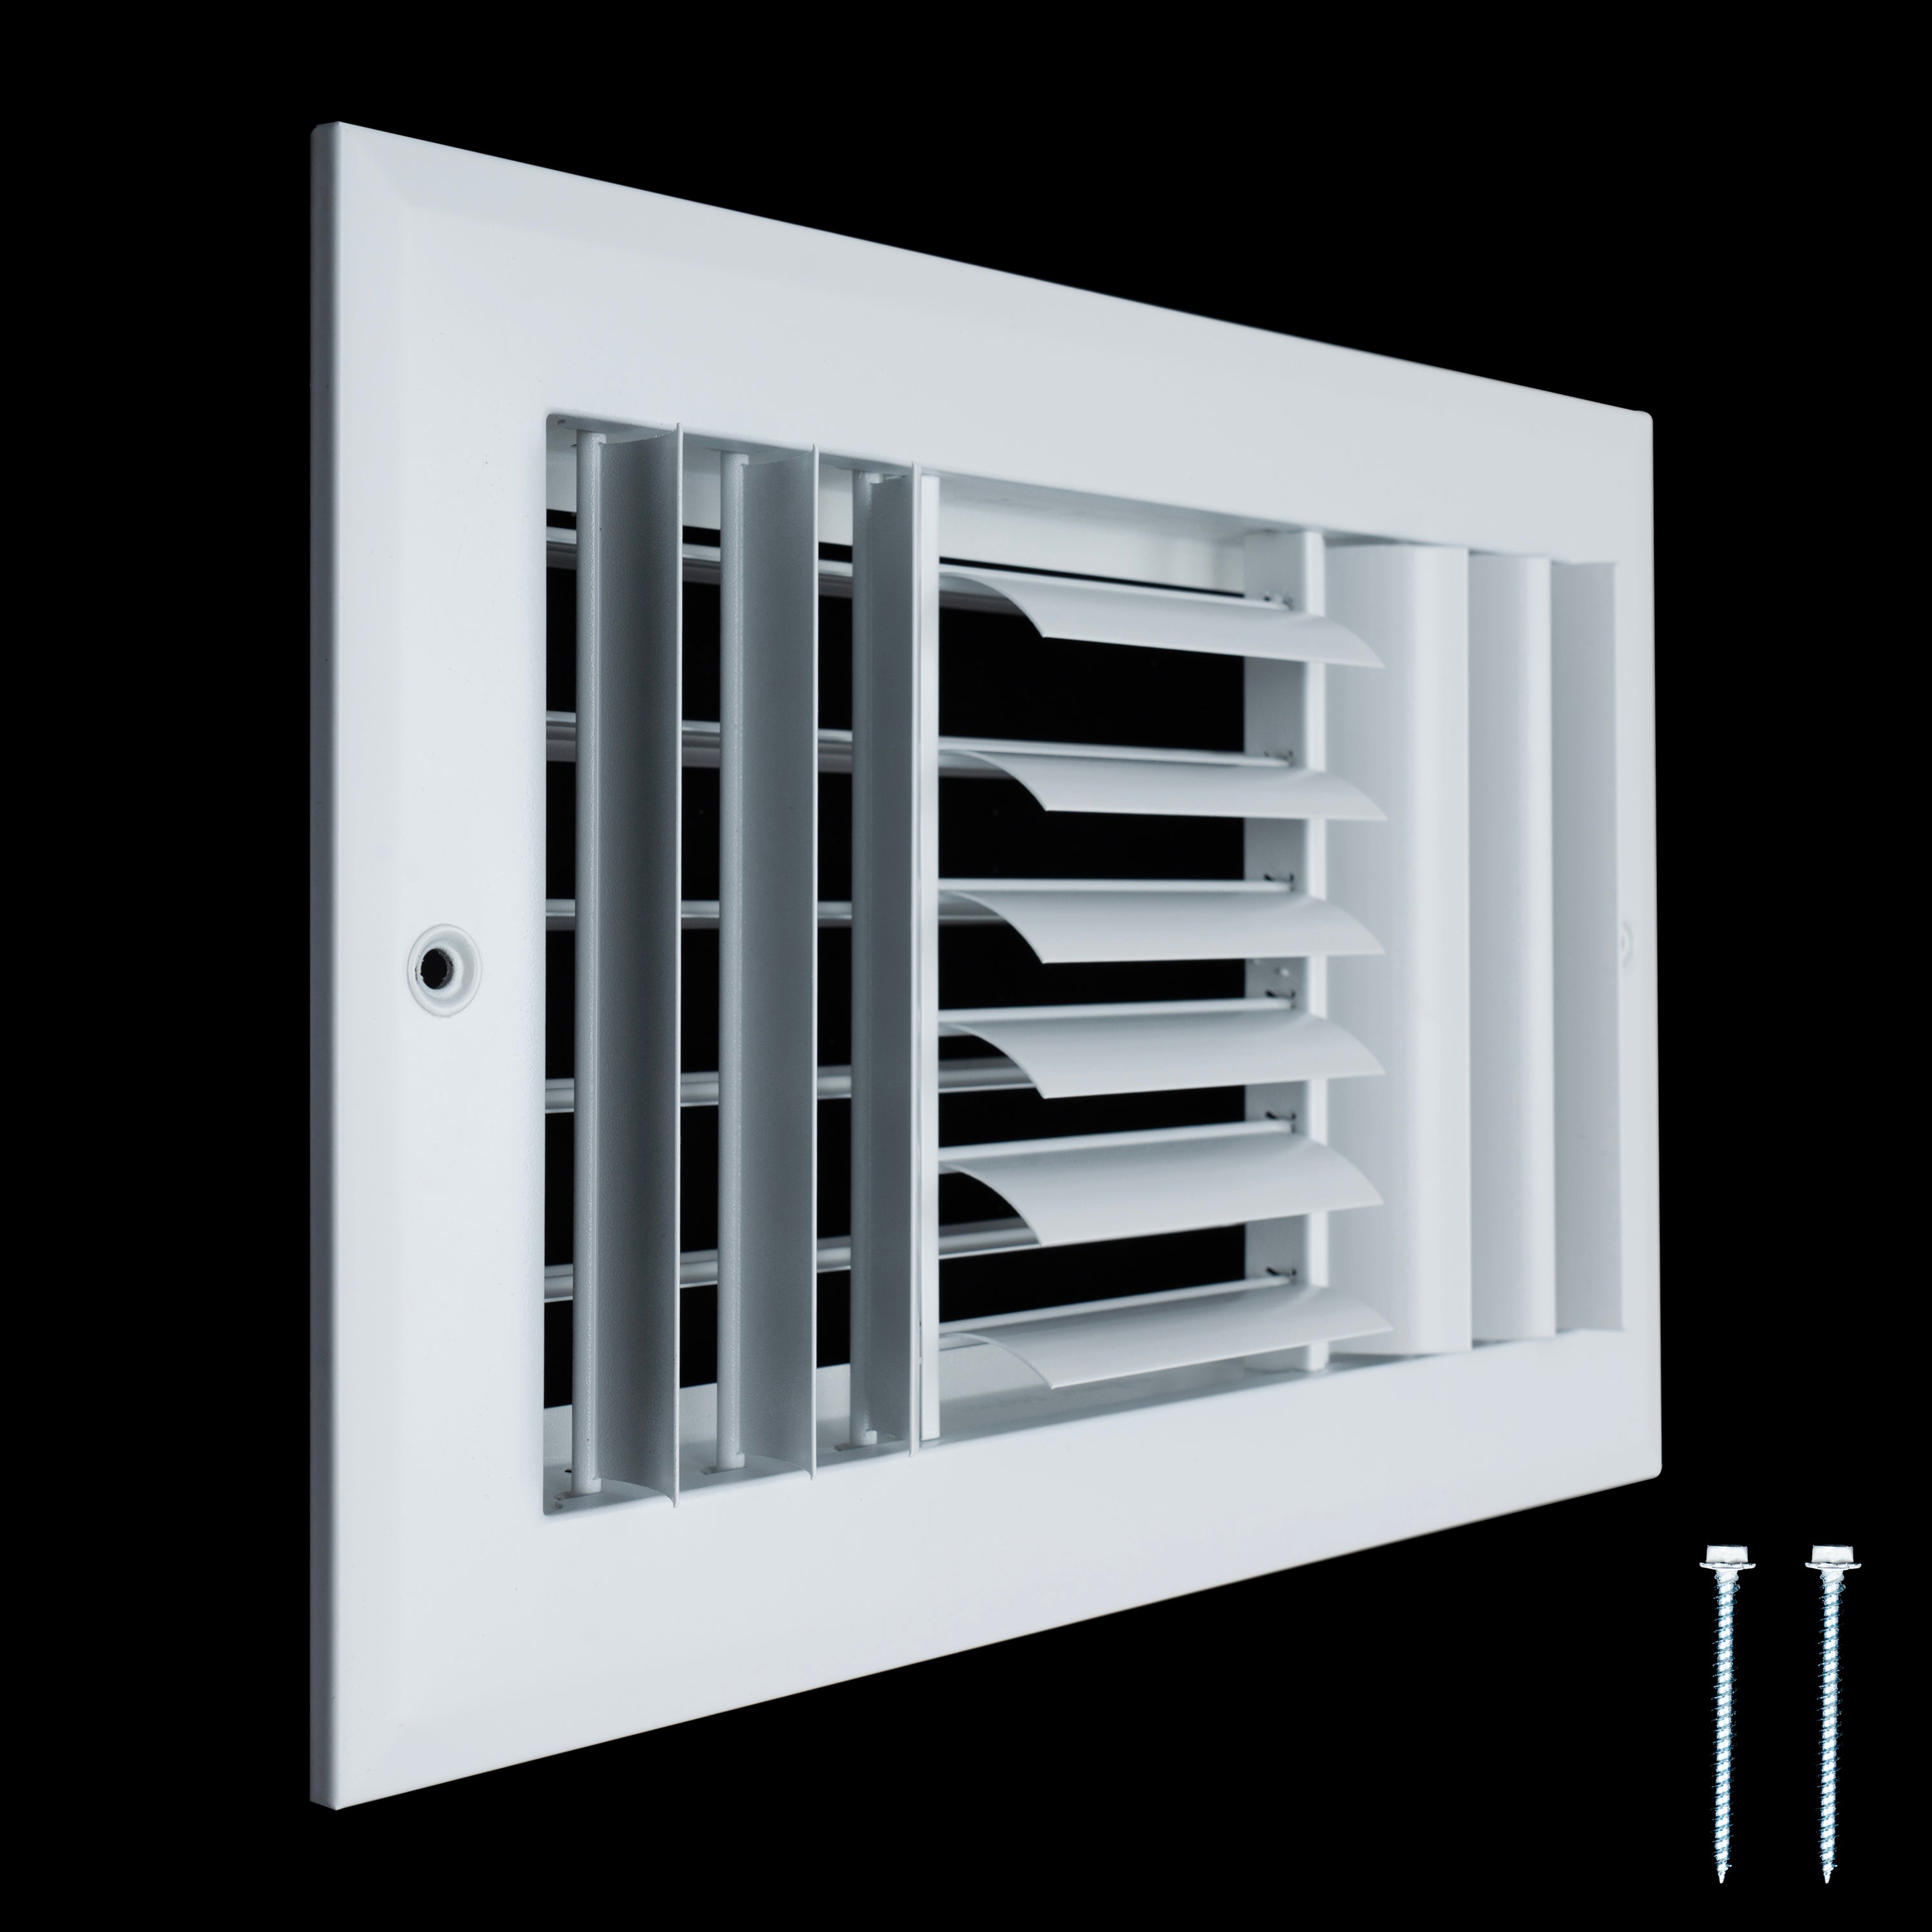 10"W x 6"H [Duct Opening] Aluminum 3-WAY Adjustable Air Supply Grille | Register Vent Cover Grill for Sidewall and Ceiling | White | Outer Dimensions: 11.75"W x 7.75"